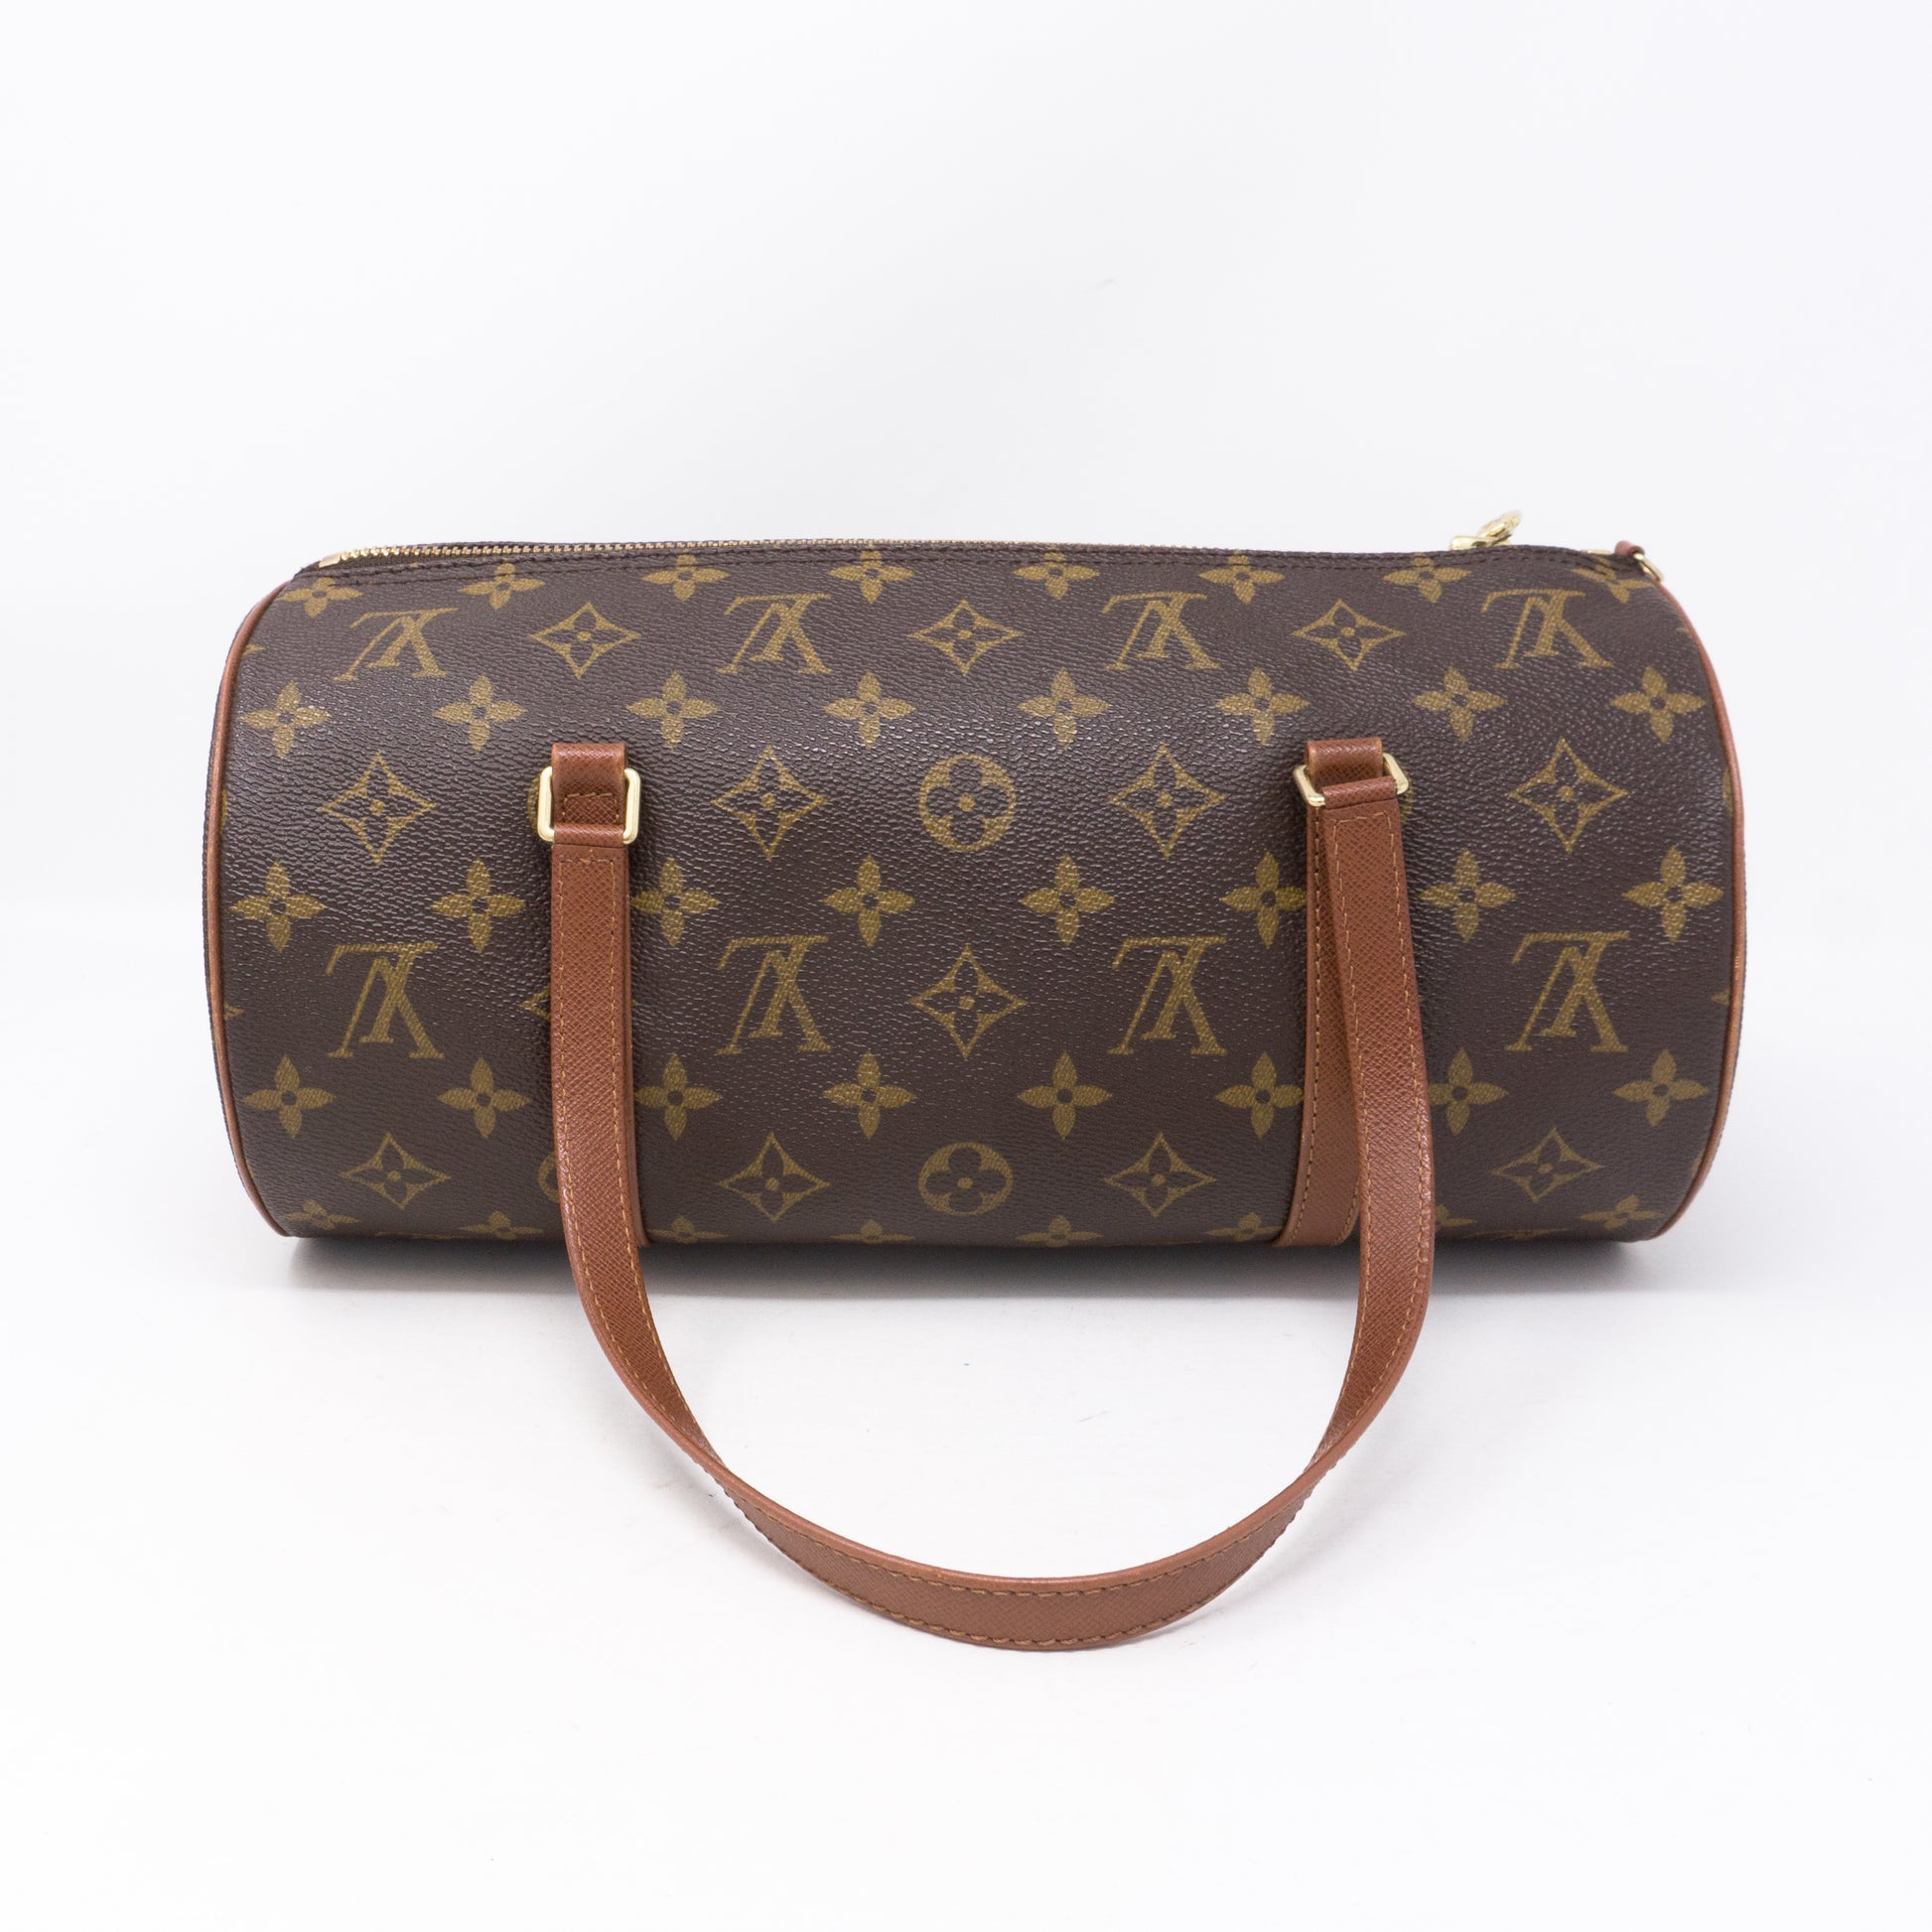 Sold at Auction: Two Louis Vuitton Monogram Canvas and Leather